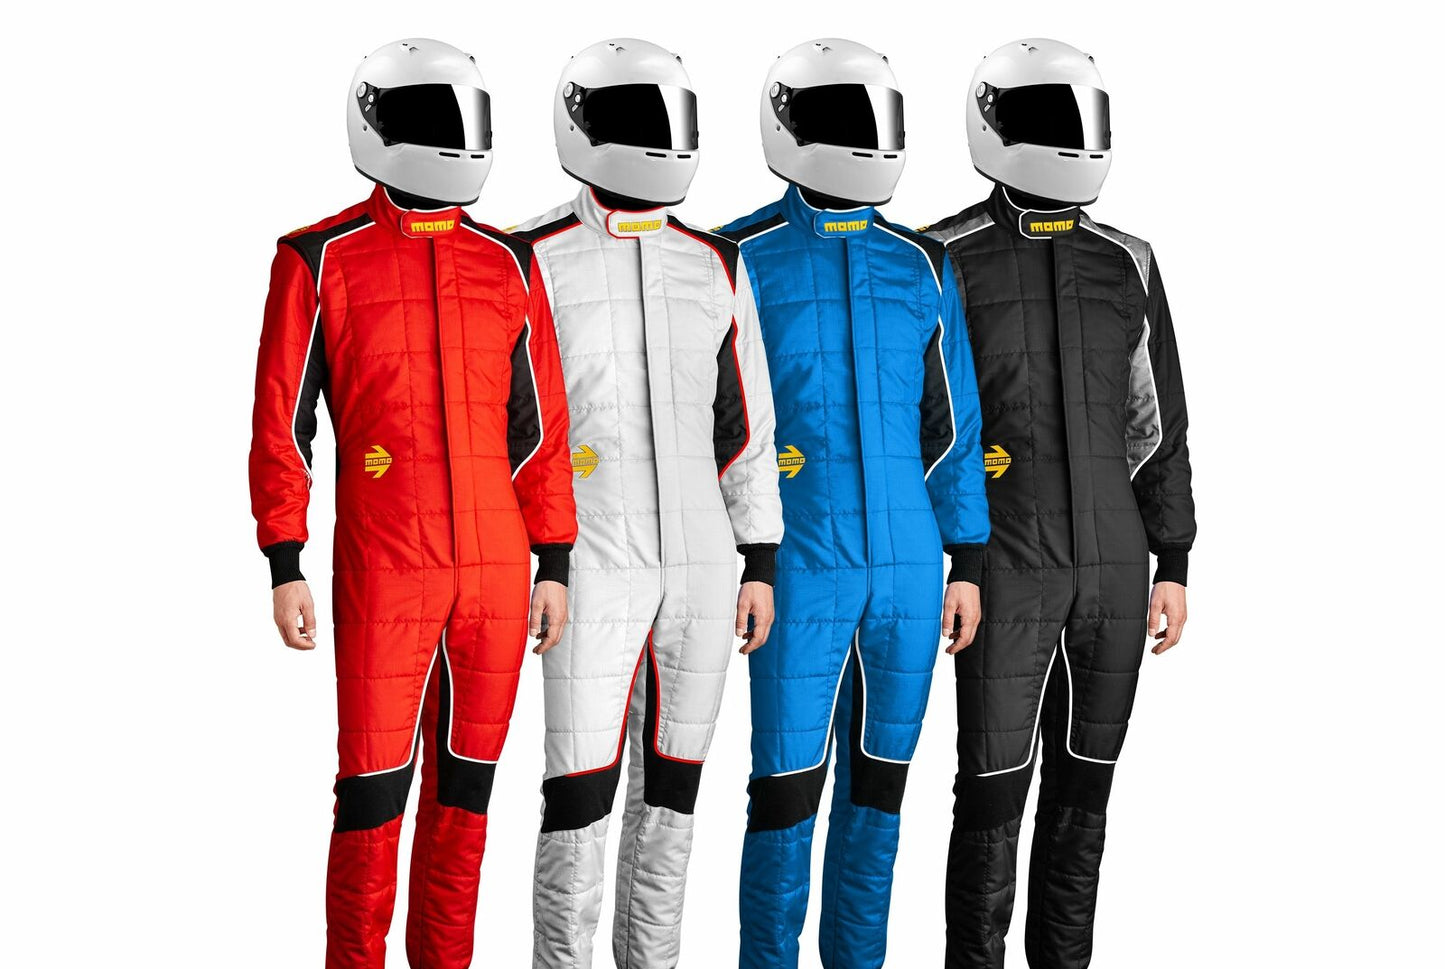 Momo Fireproof Racing Suit - CORSA EVO - Black (FIA Approved)